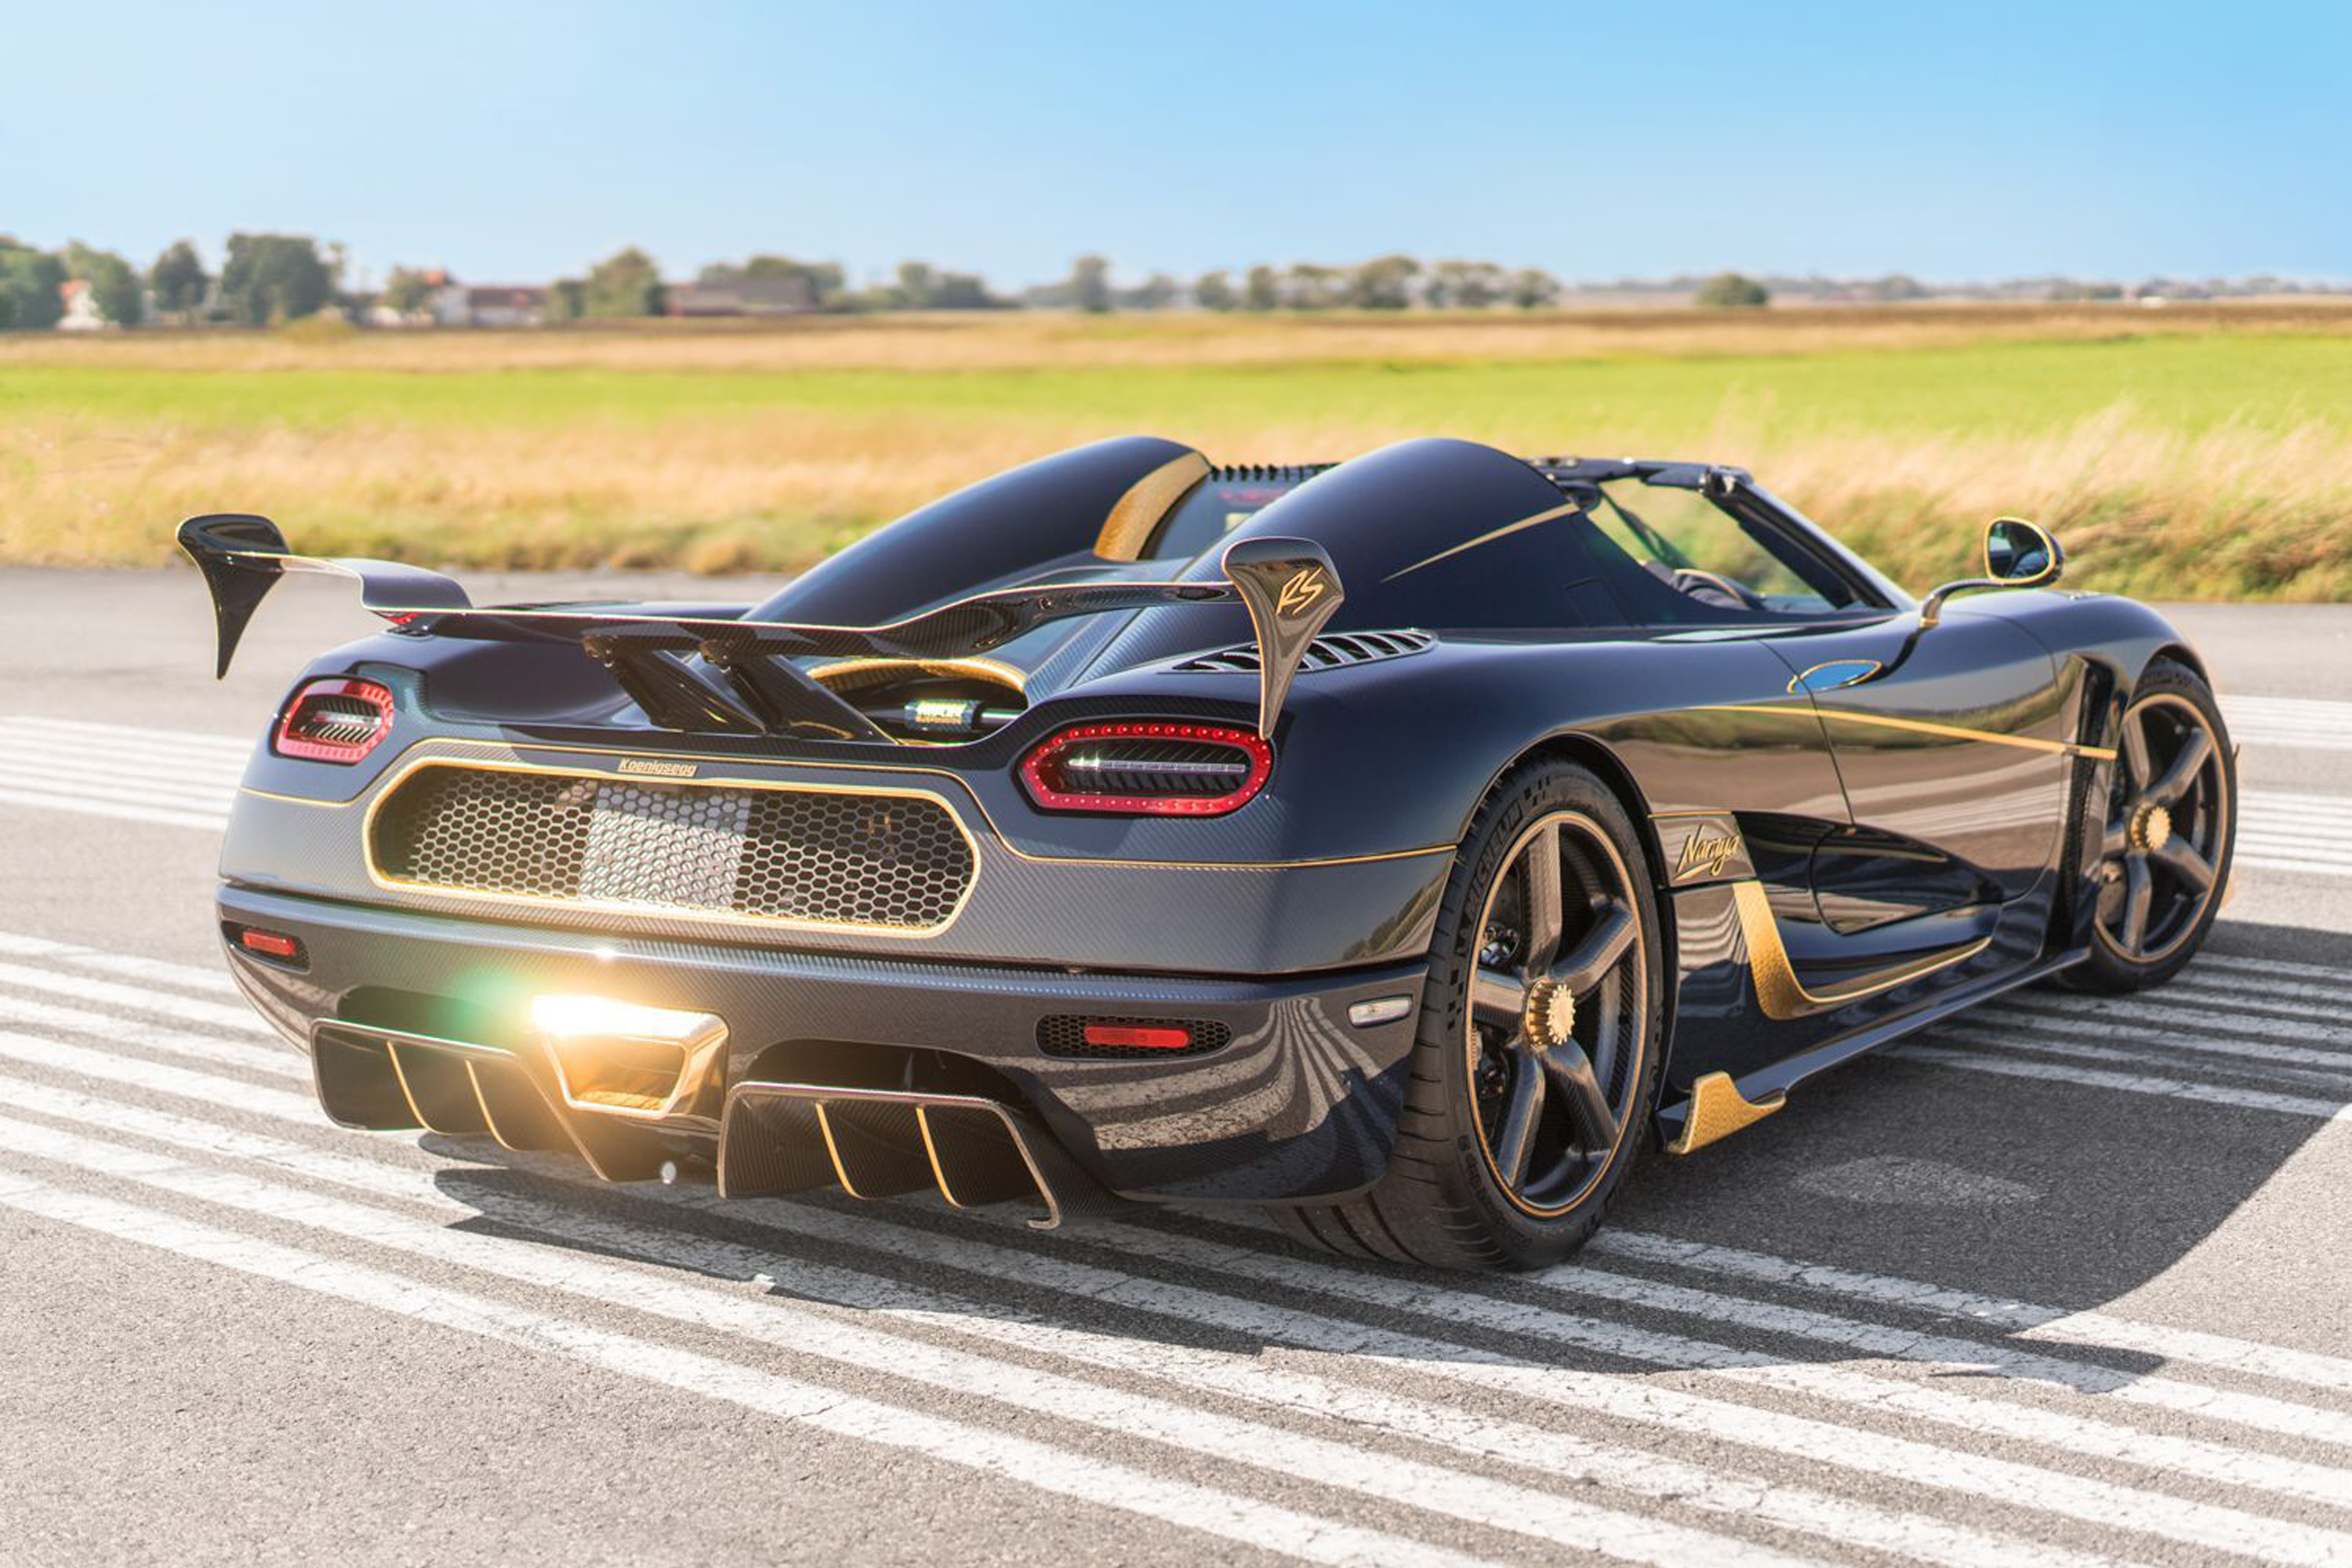 Wallpapers Koenigsegg Agera cars 2016 cars on the desktop